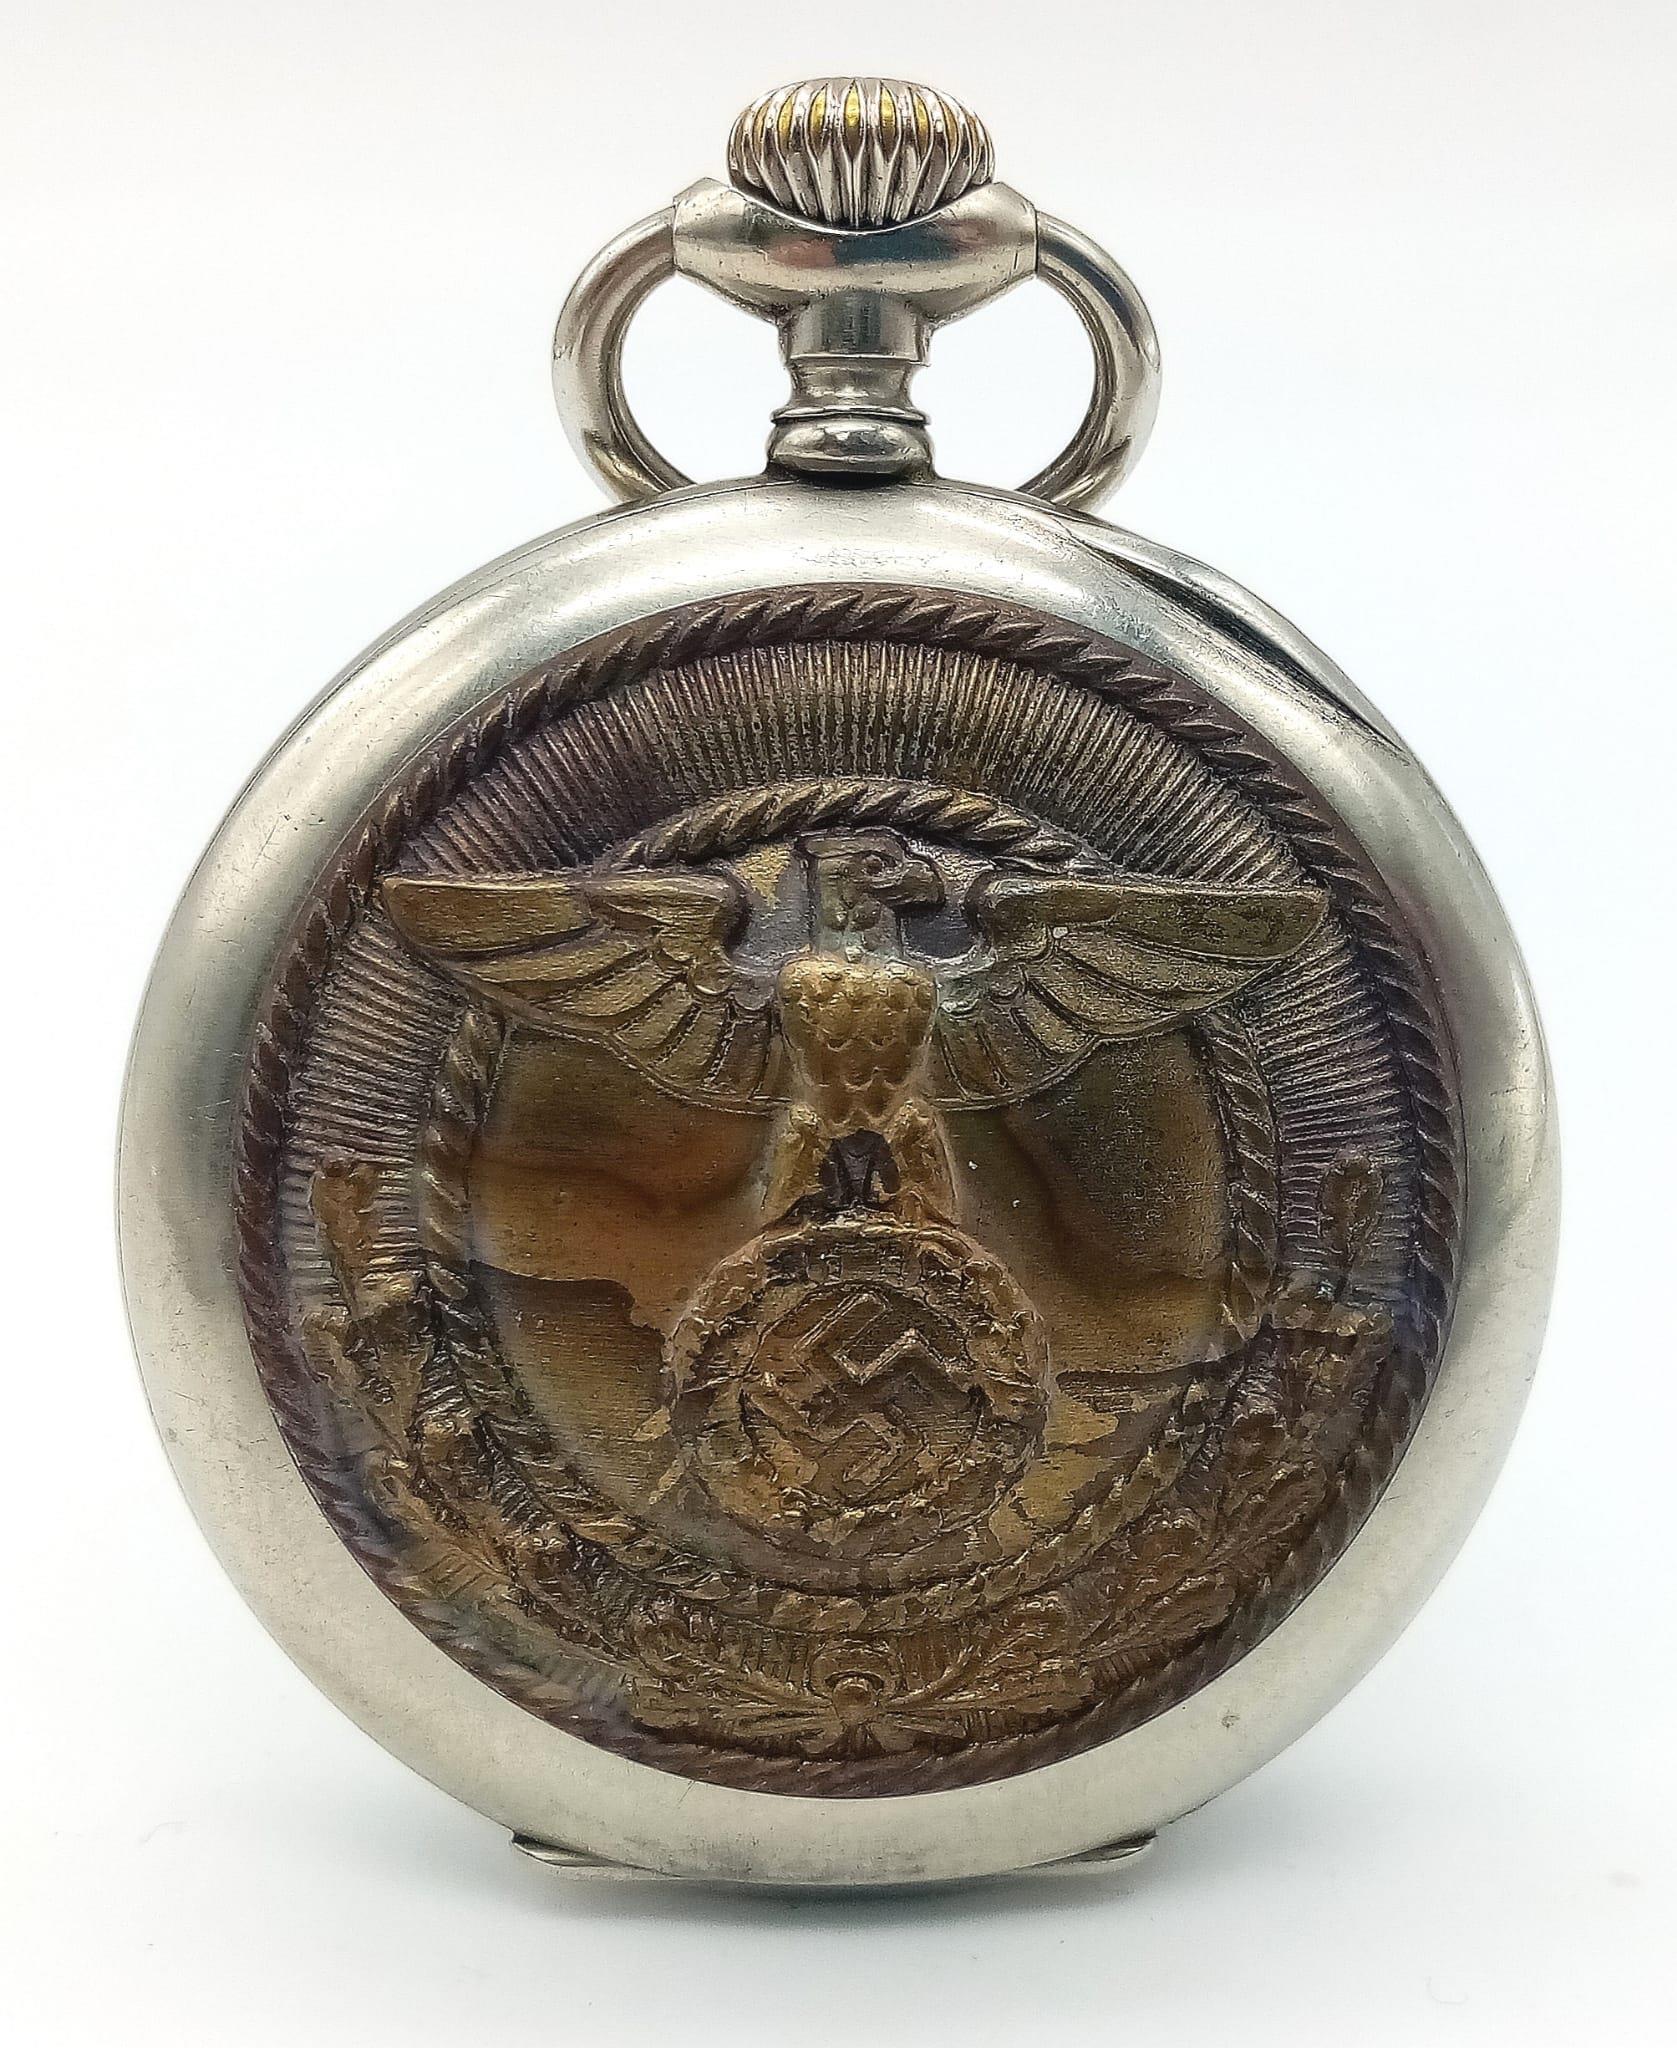 3rd Reich S.A Pocket Watch with Swiss movement by Moreis. Good working order. - Image 3 of 9